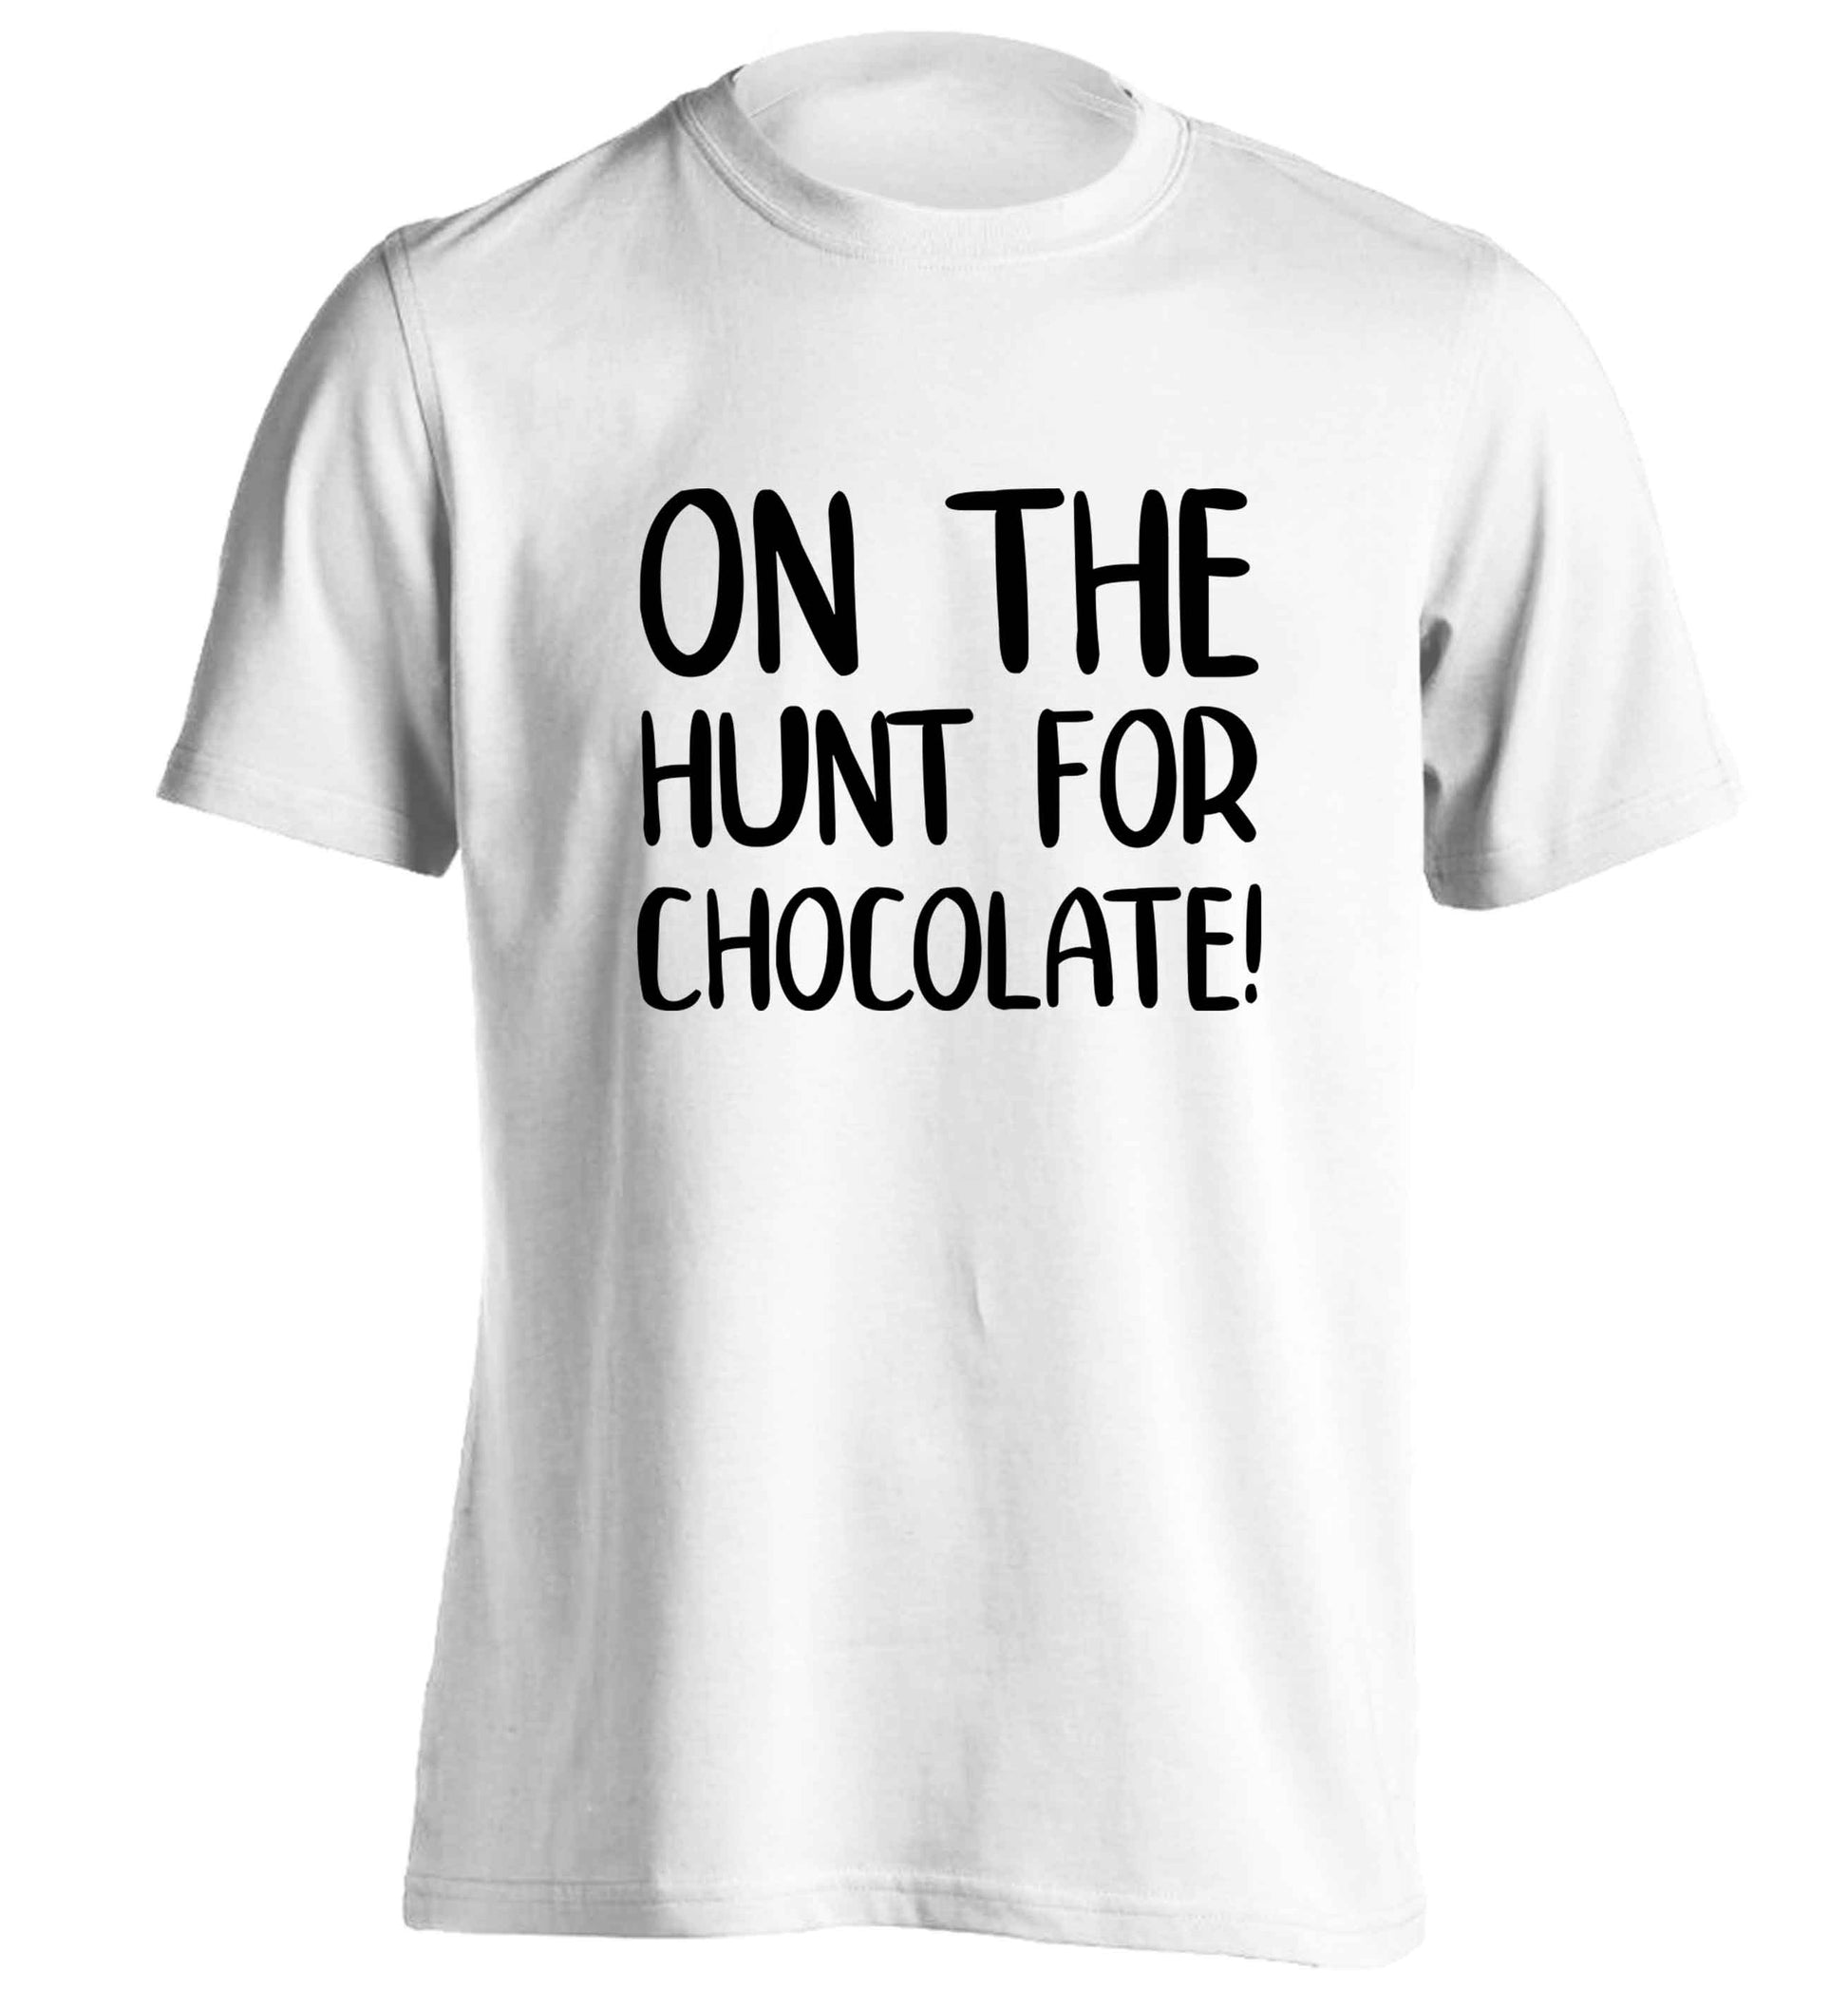 On the hunt for chocolate! adults unisex white Tshirt 2XL